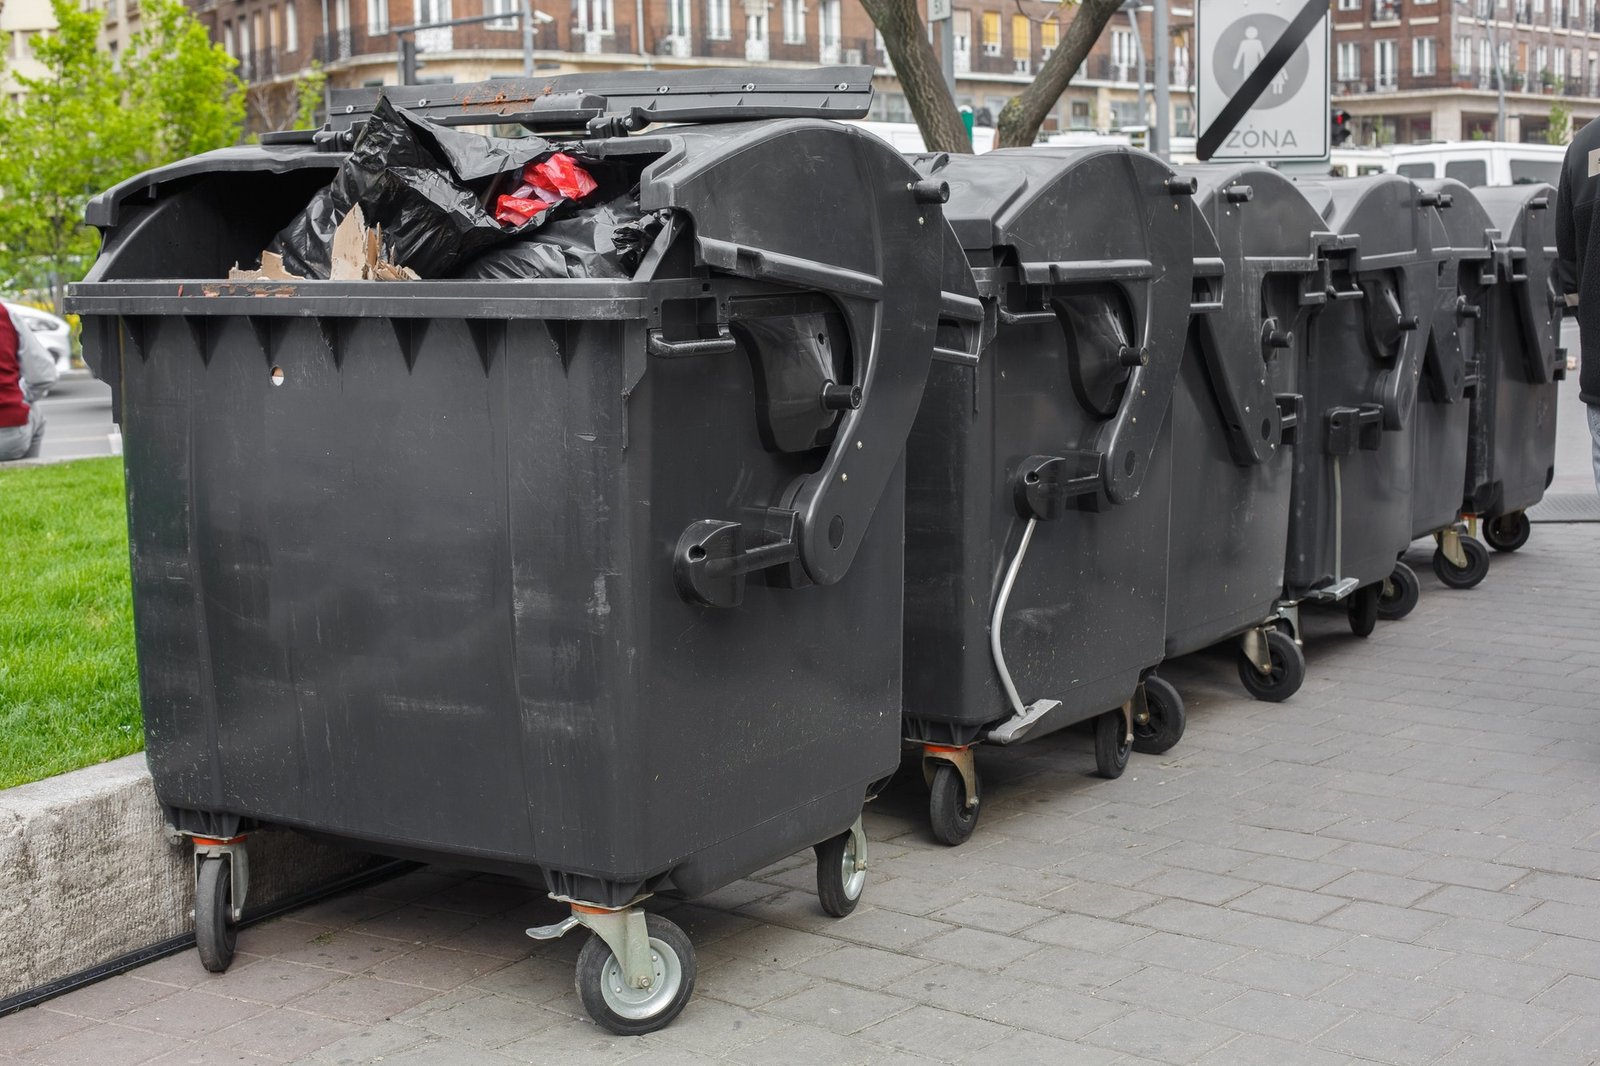 black-plastic-dumpster-street-large-garbage-containers.jpg